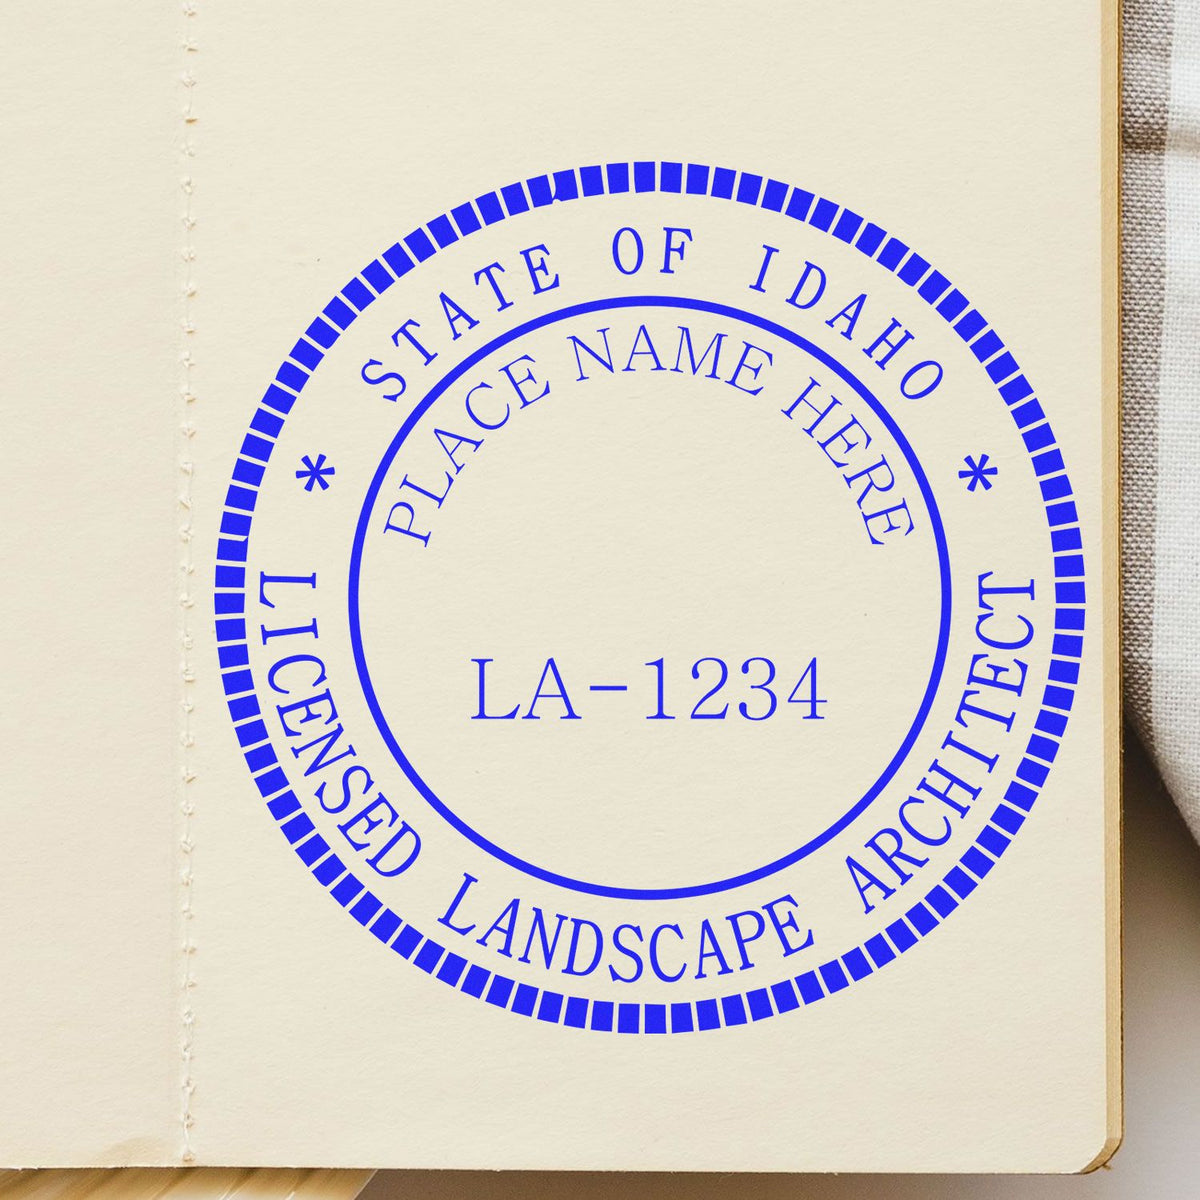 The Slim Pre-Inked Idaho Landscape Architect Seal Stamp stamp impression comes to life with a crisp, detailed photo on paper - showcasing true professional quality.